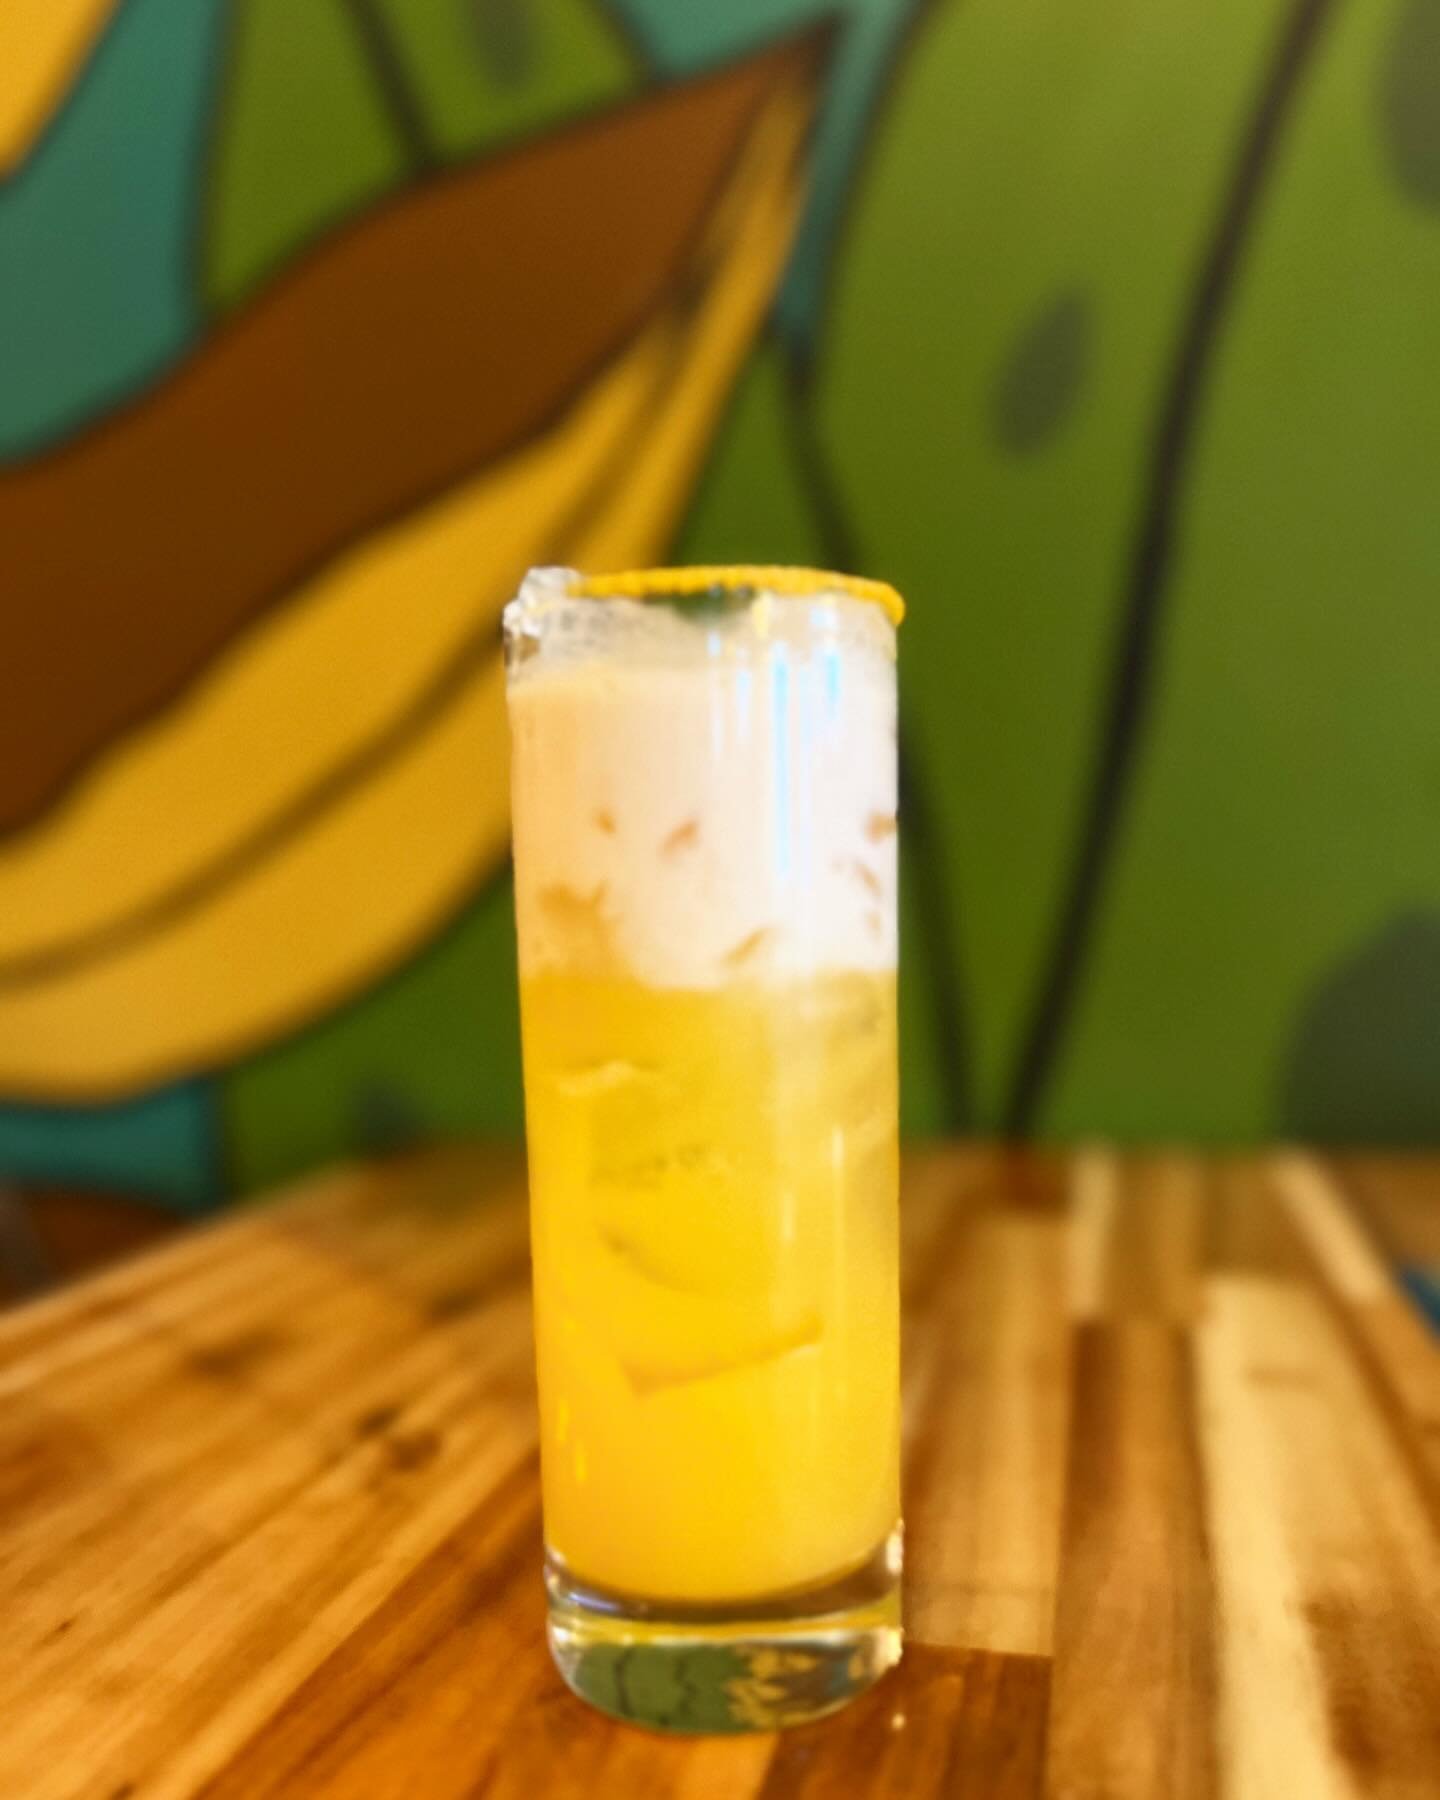 May Feature Margarita: ORANGE CREAMSICLE 🍊🍦🍊🍦🍊🍦🍊🍦🍊🍦

Cazadores Reposado
Grand Marnier
Orange Juice 
Citrus &amp; Sugar 
Coconut vanilla cream float

Available zero-proof too 😊

Only around for the month of May! Get into the summer spirit w